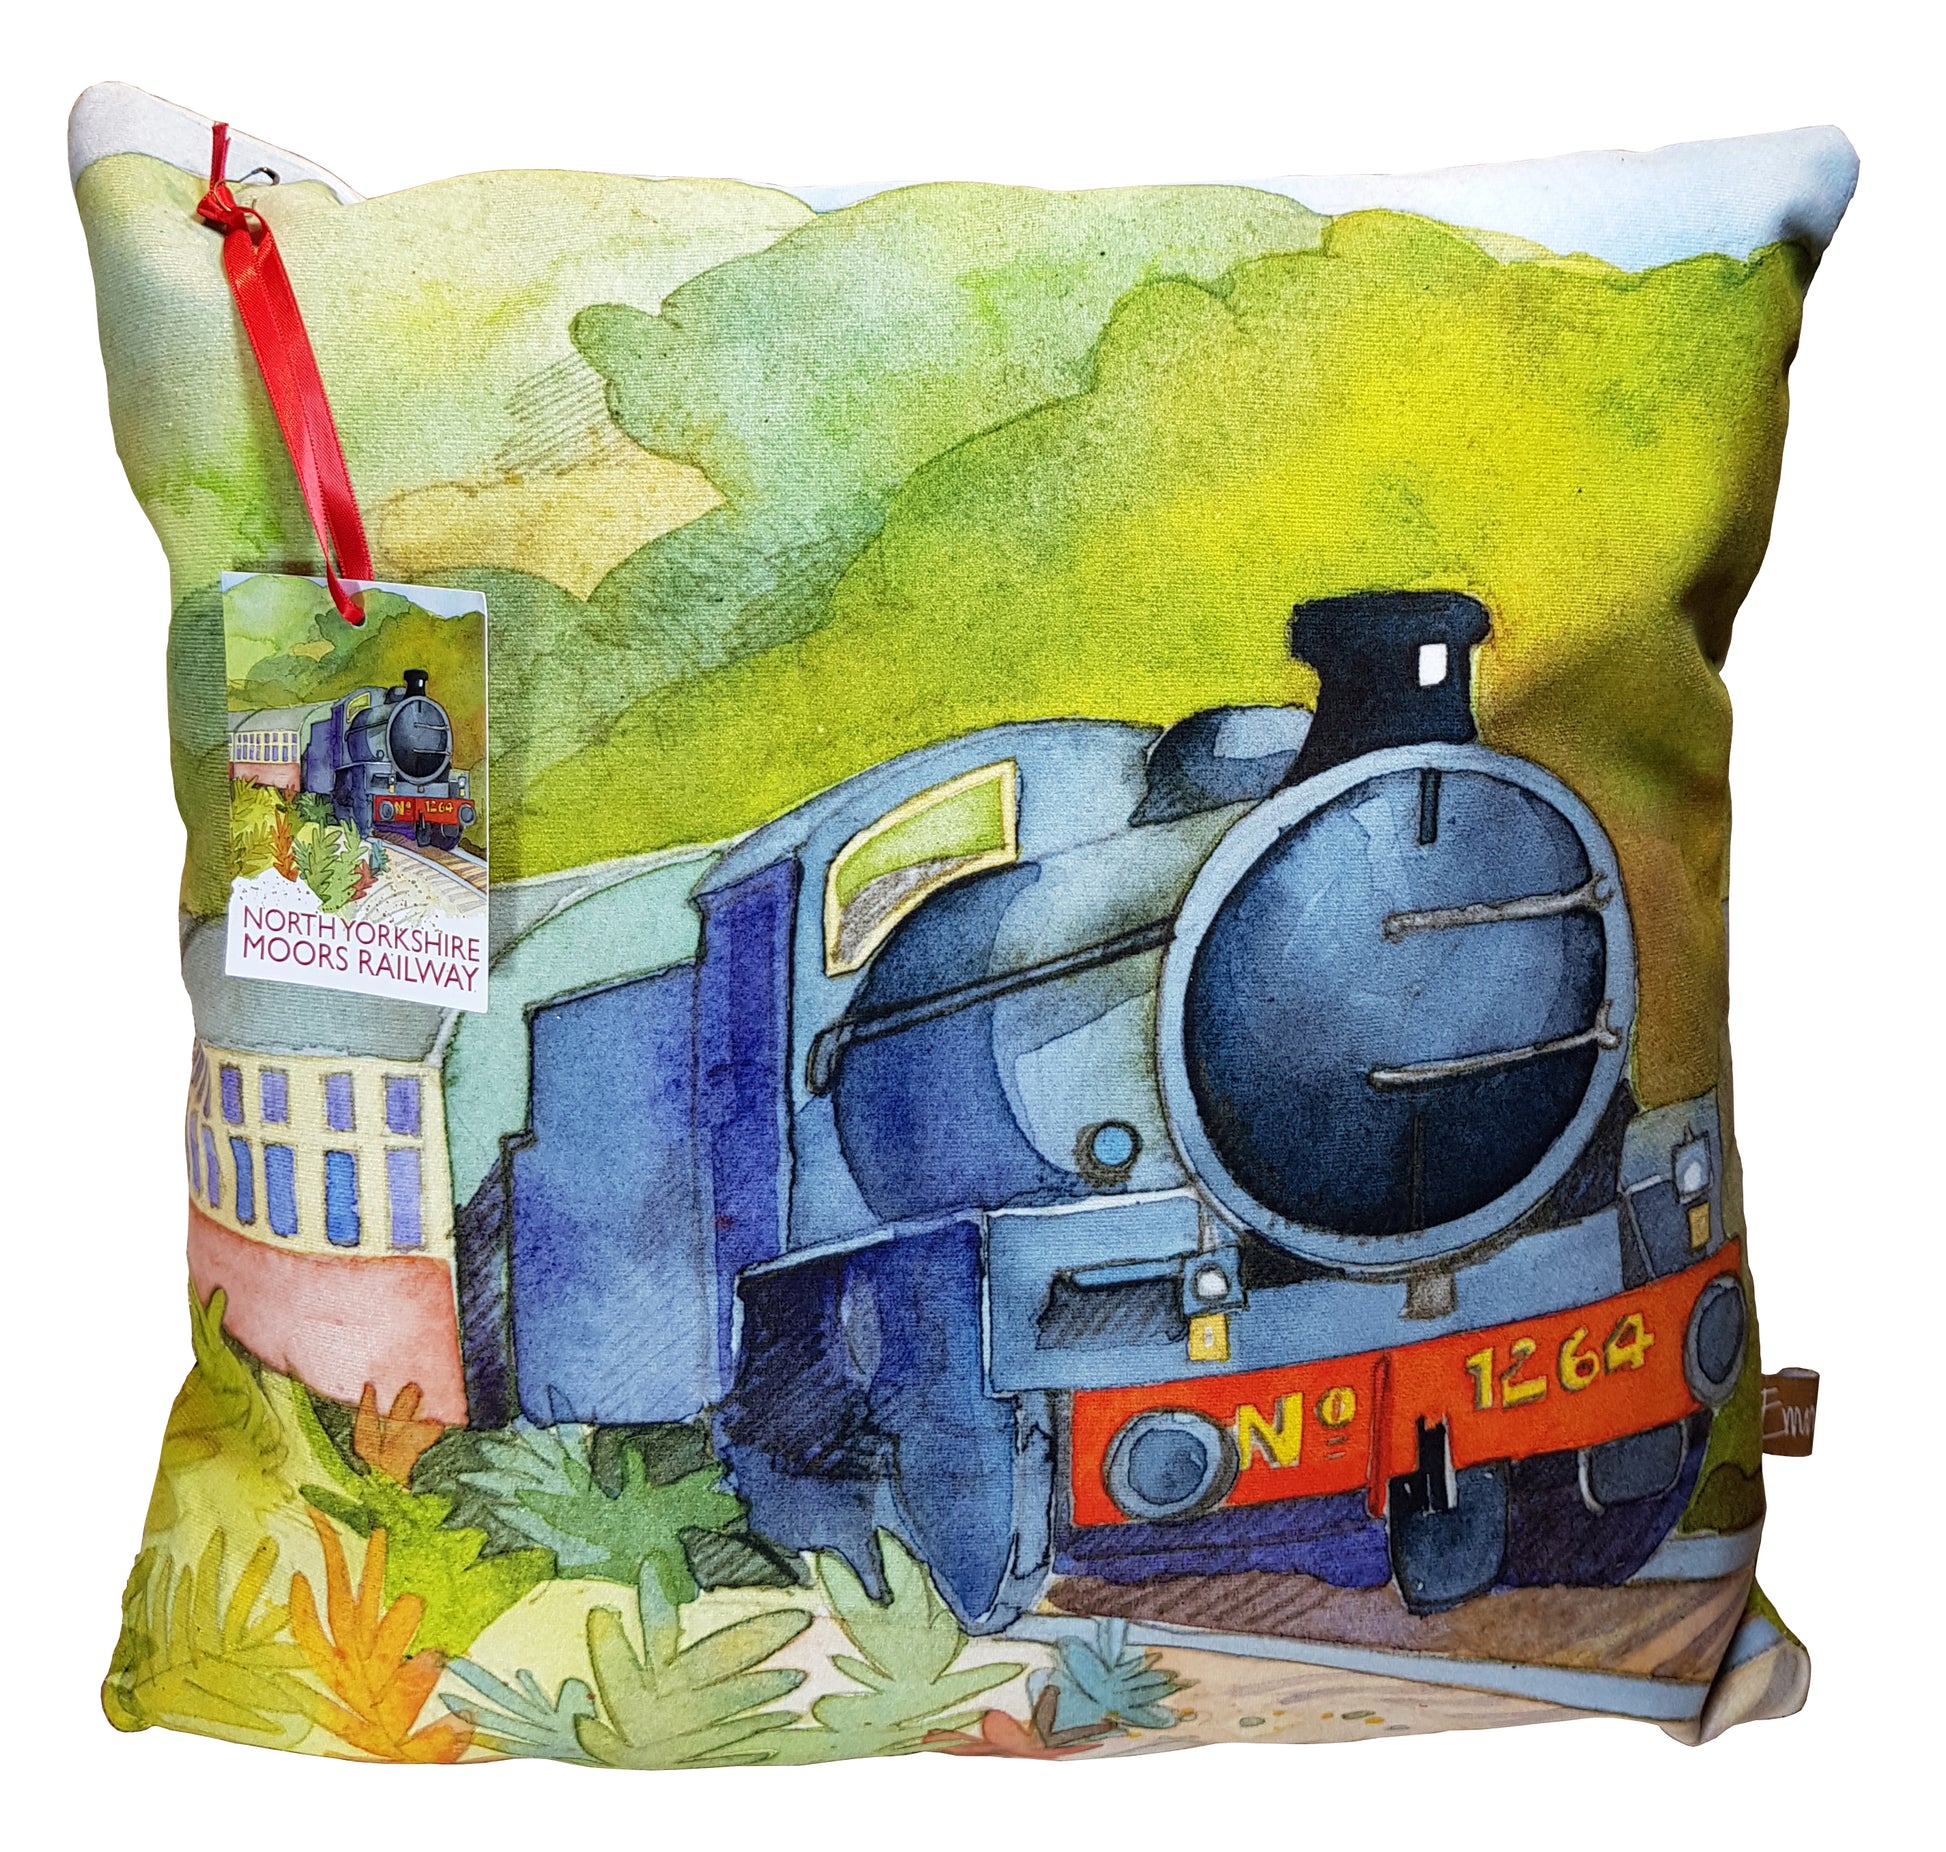 Square cushion with painting of steam train travelling through countryside and North Yorkshire Moors Railway label attached with red ribbon.